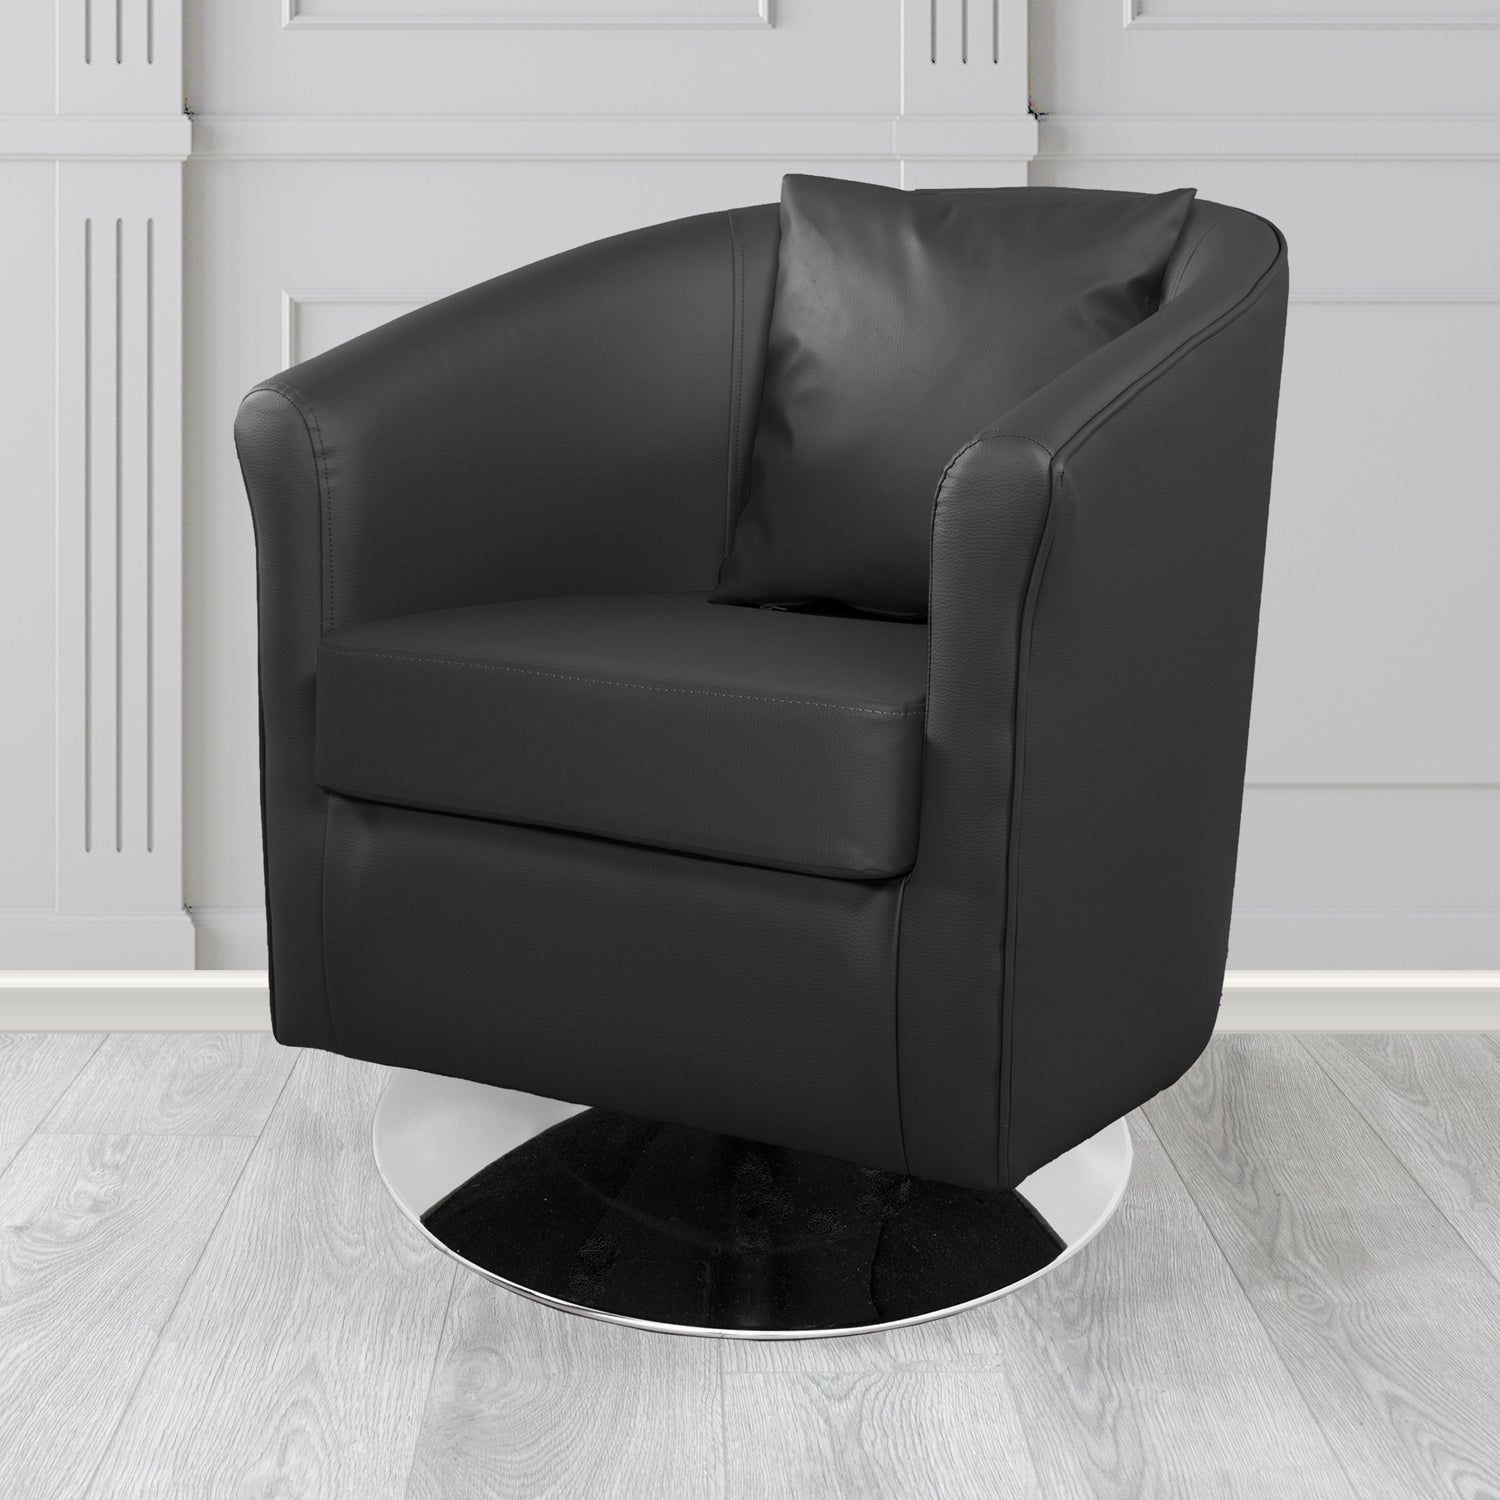 St Tropez Swivel Tub Chair with Scatter Cushion in Madrid Black Faux Leather - The Tub Chair Shop